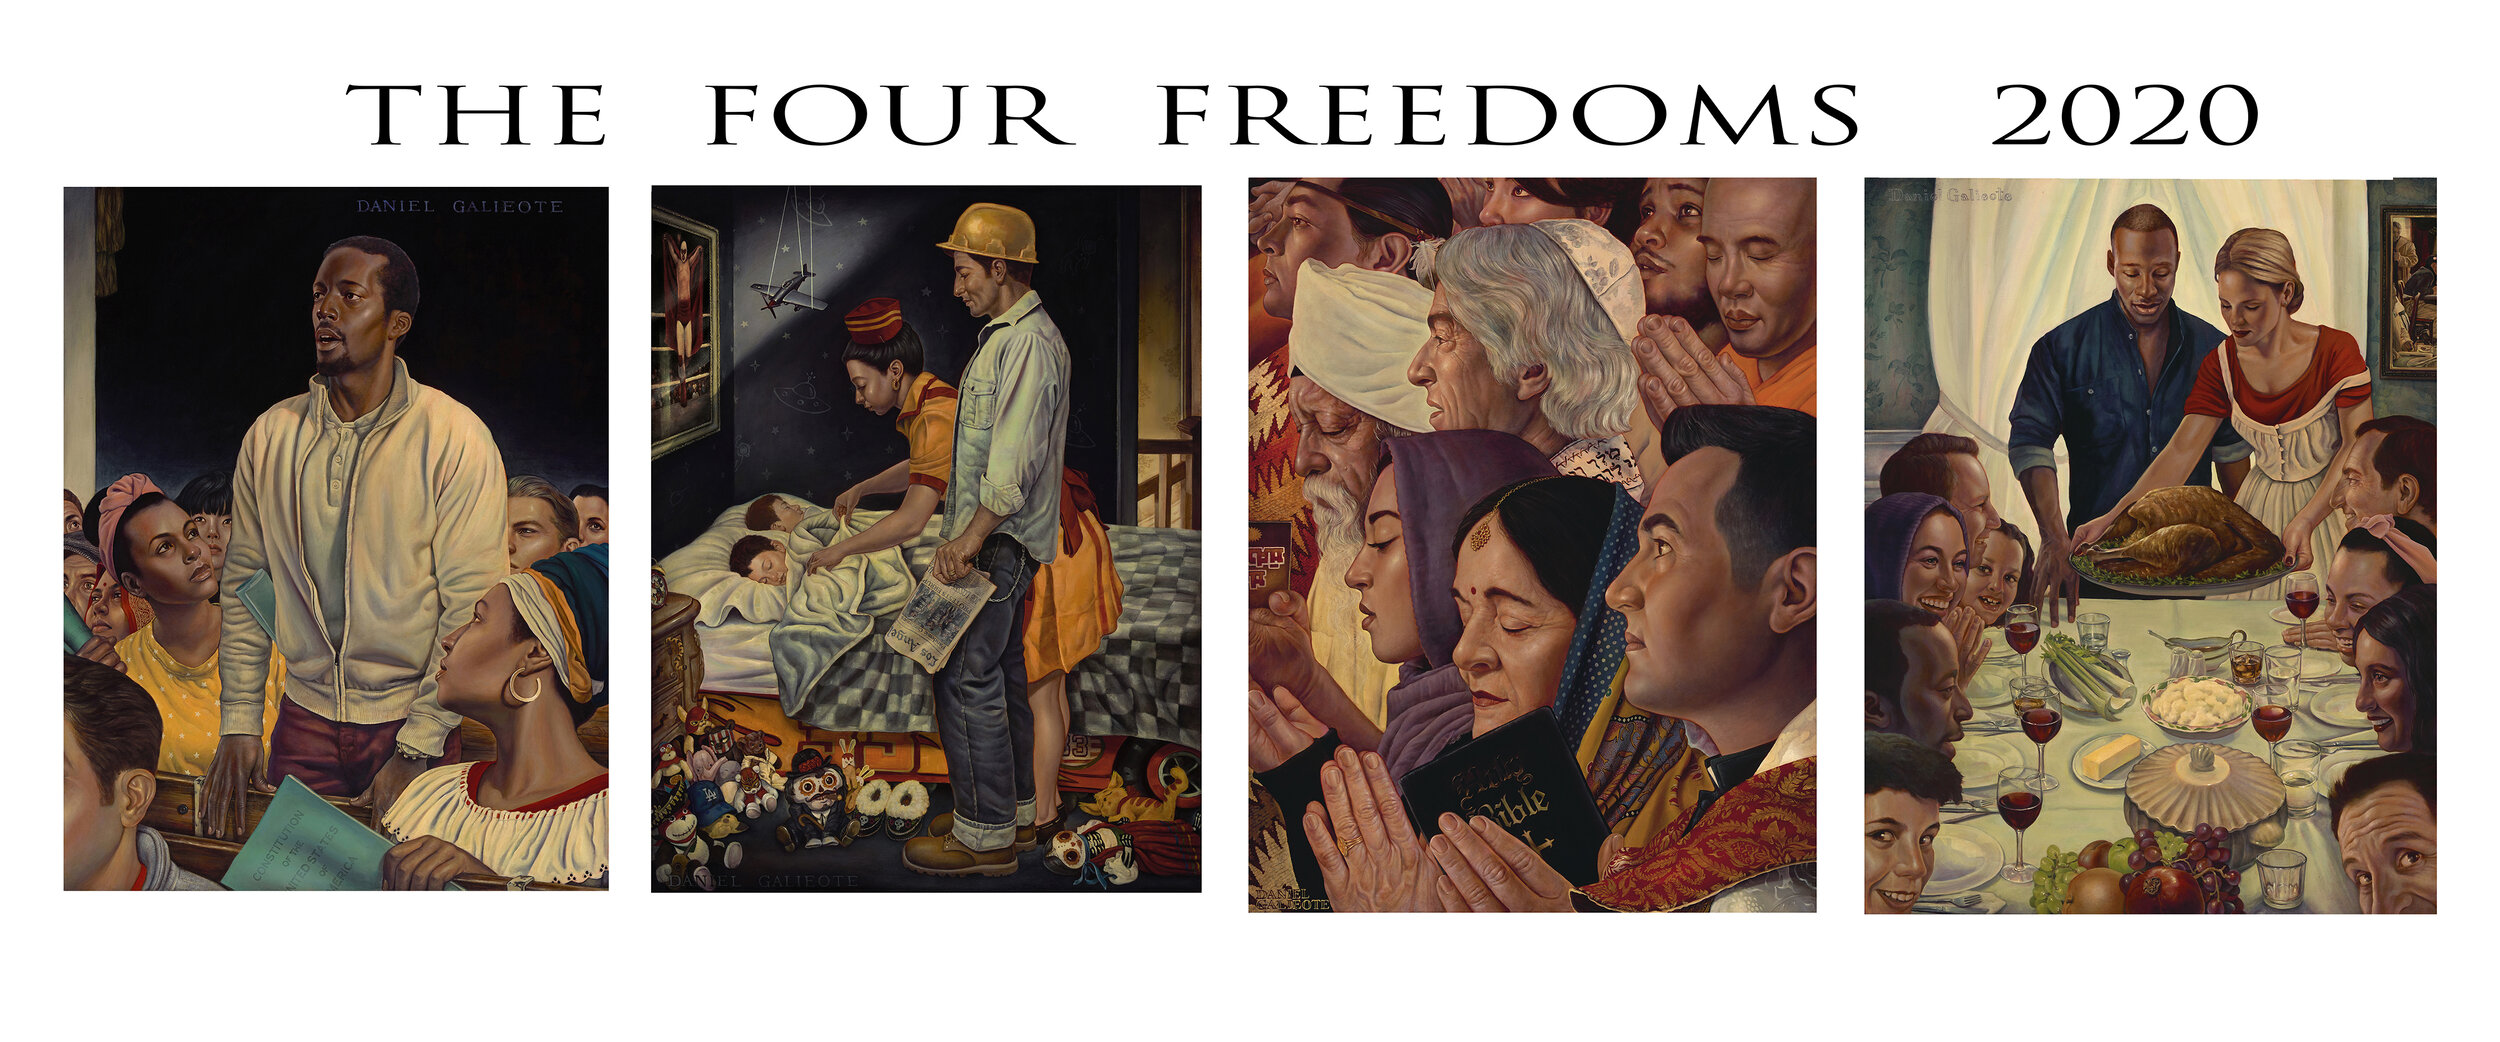 DGalieote-FourFreedoms-AllTogether3a.jpg